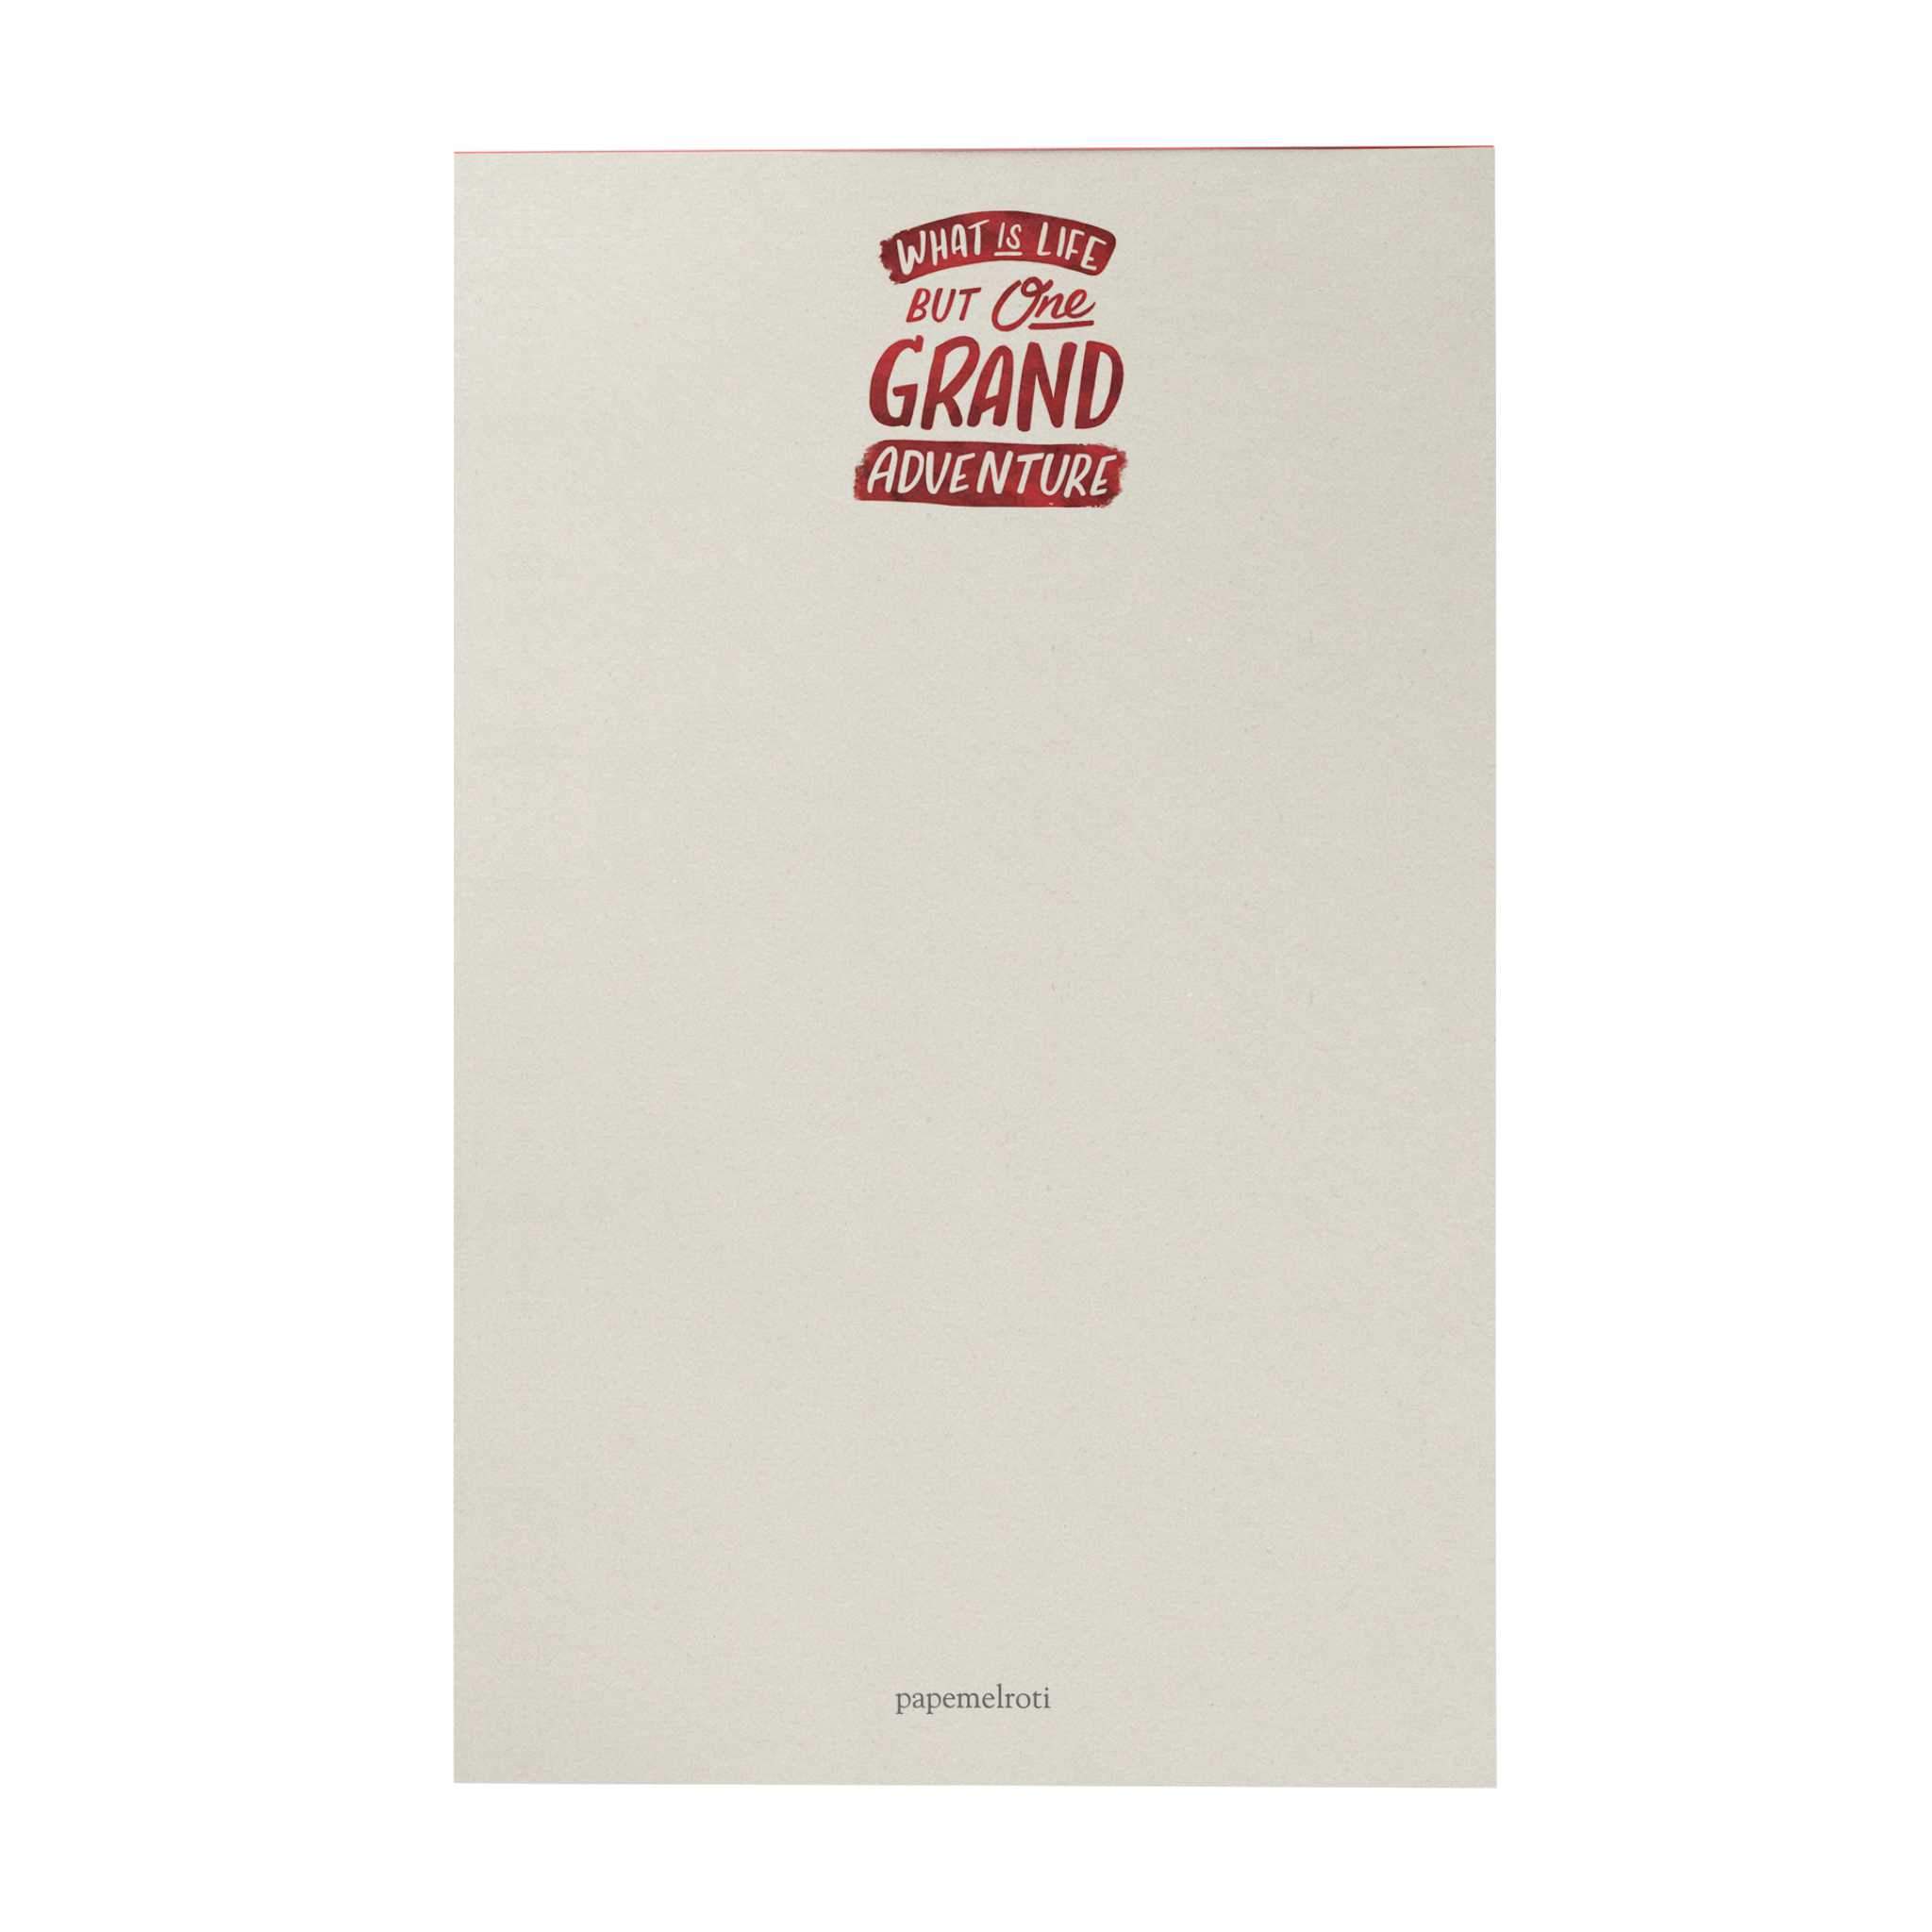 Grand Adventure Writing Pad: What Is Life